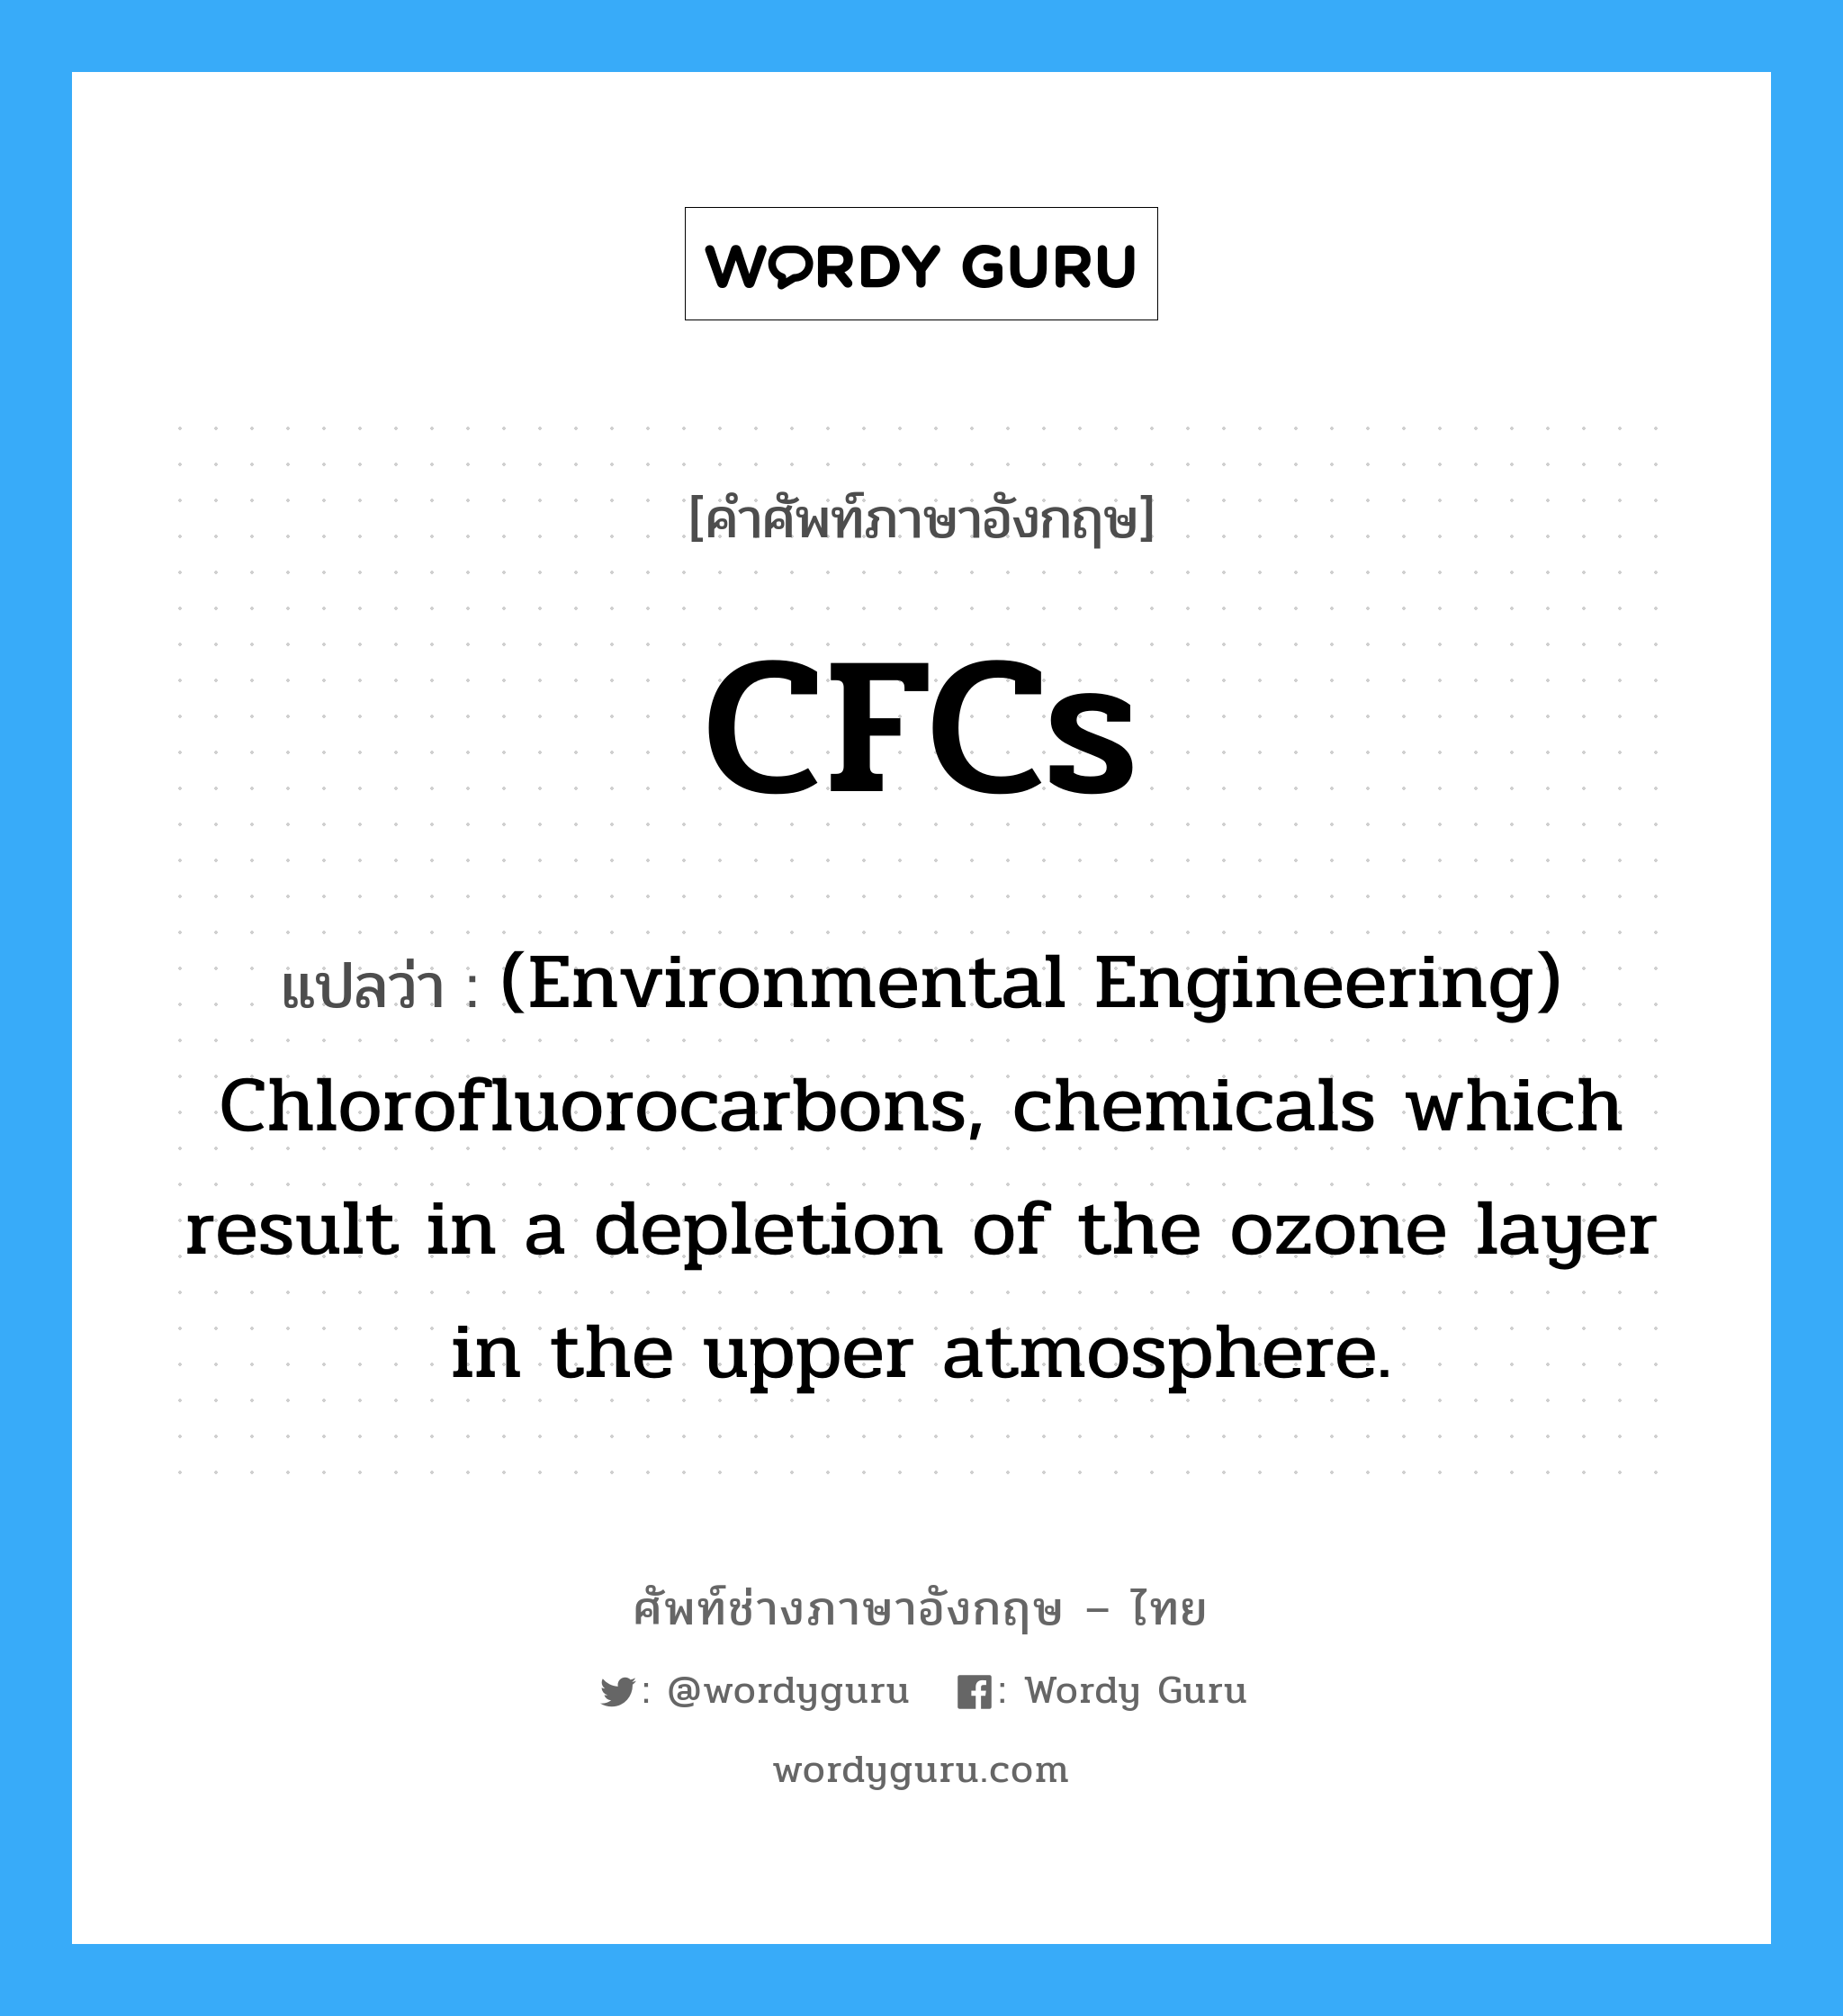 (Environmental Engineering) Chlorofluorocarbons, chemicals which result in a depletion of the ozone layer in the upper atmosphere. ภาษาอังกฤษ?, คำศัพท์ช่างภาษาอังกฤษ - ไทย (Environmental Engineering) Chlorofluorocarbons, chemicals which result in a depletion of the ozone layer in the upper atmosphere. คำศัพท์ภาษาอังกฤษ (Environmental Engineering) Chlorofluorocarbons, chemicals which result in a depletion of the ozone layer in the upper atmosphere. แปลว่า CFCs